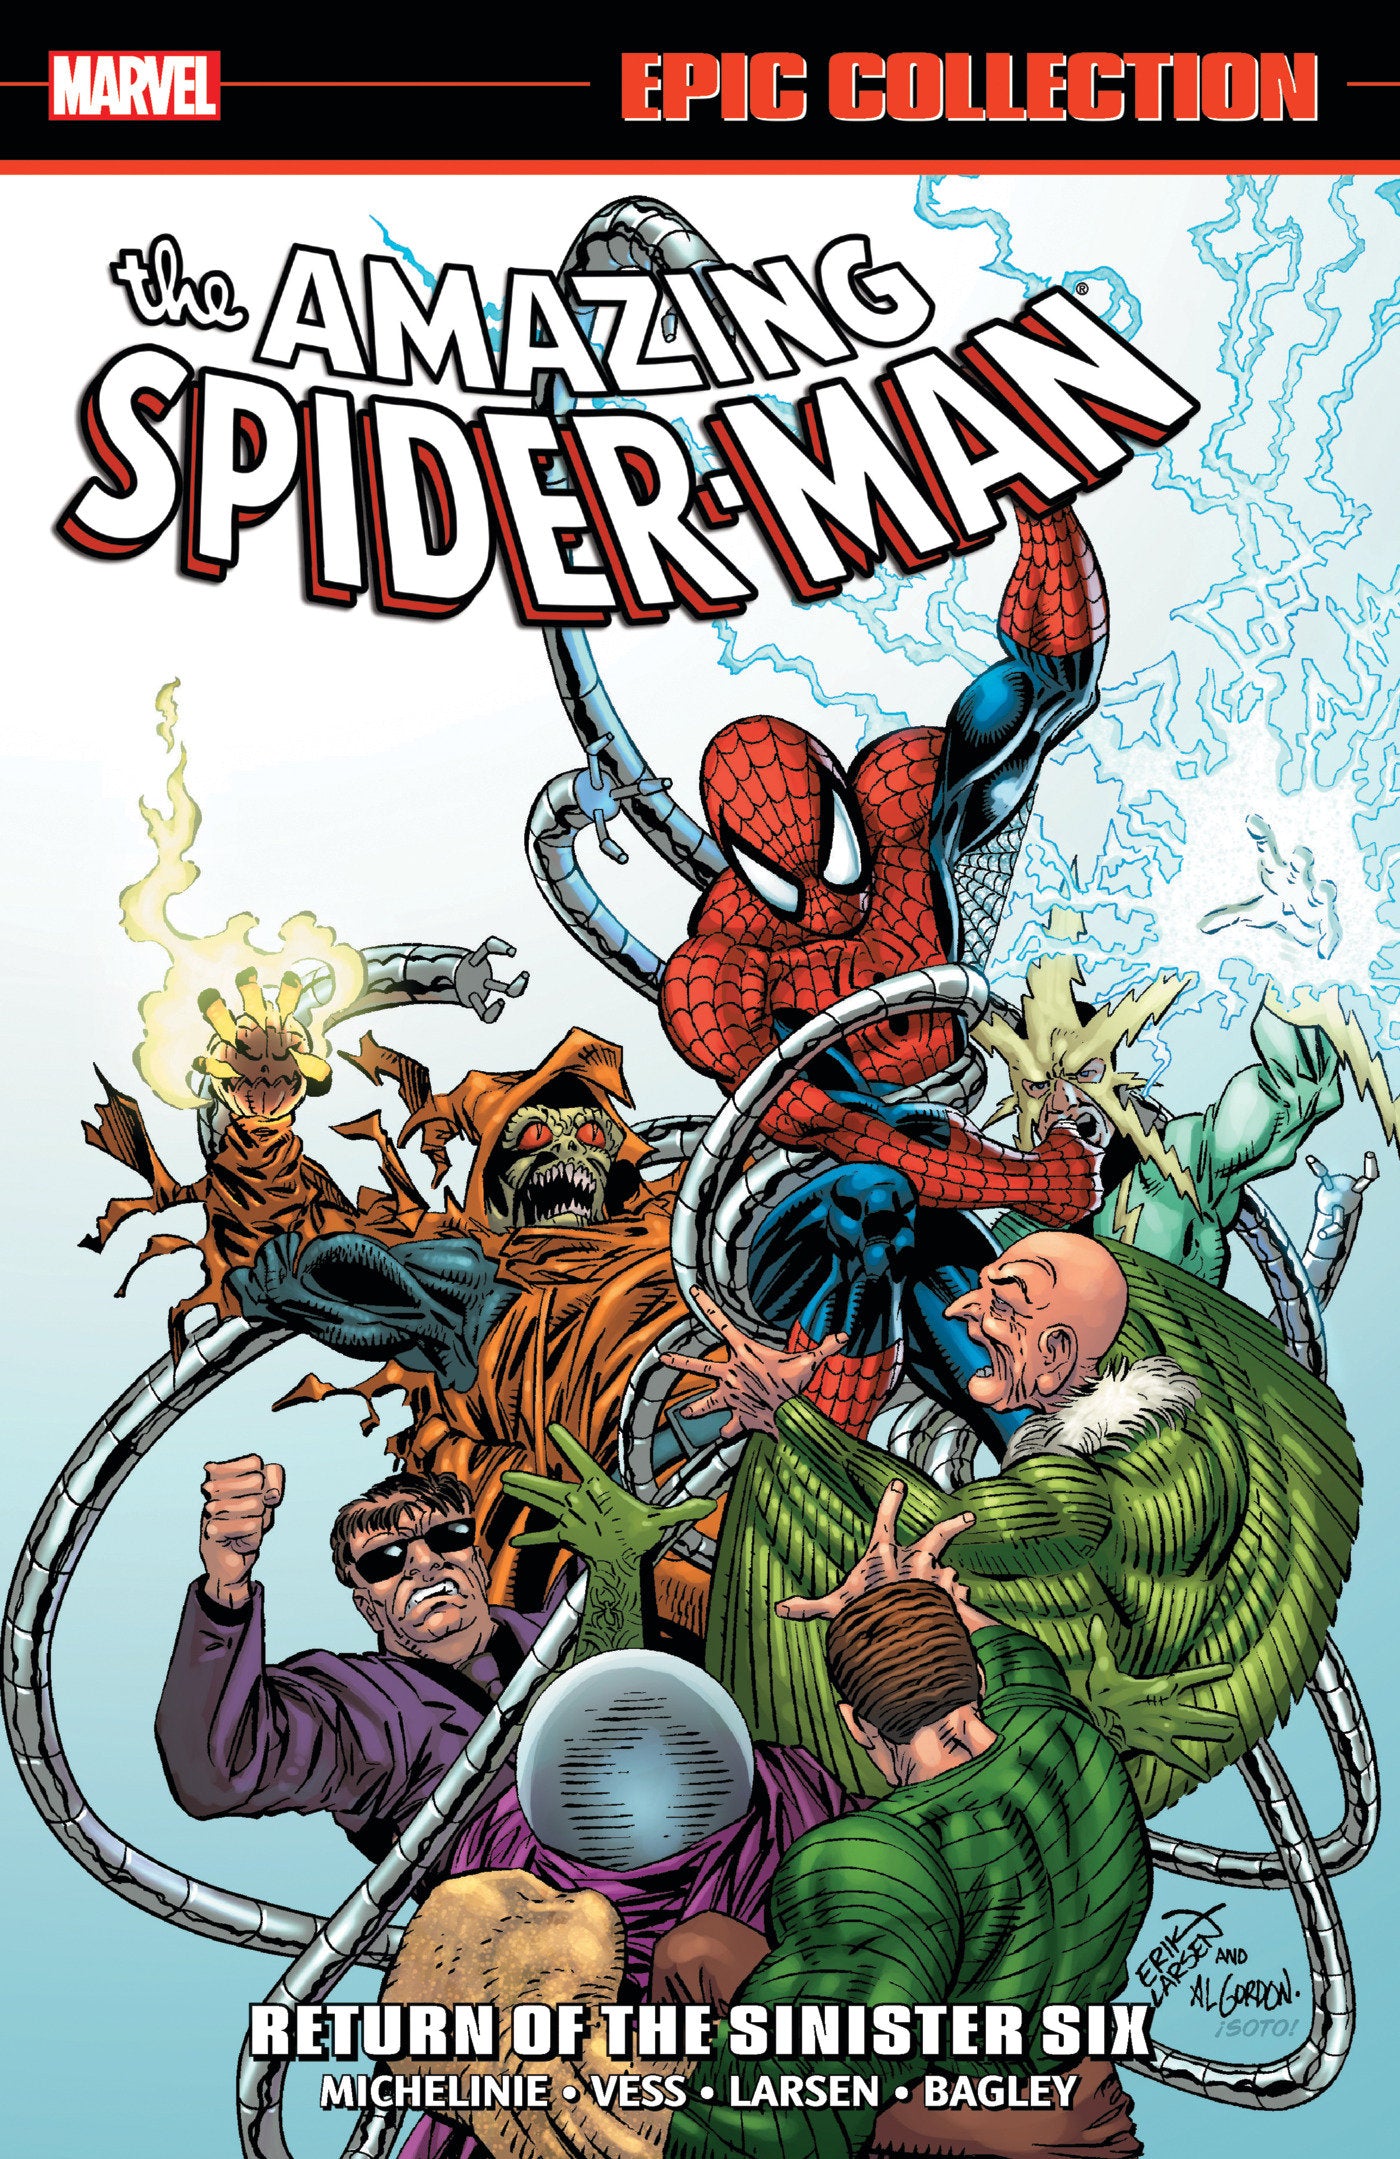 AMAZING SPIDER-MAN EPIC COLLECTION: RETURN OF THE SINISTER SIX TRADE PAPERBACK